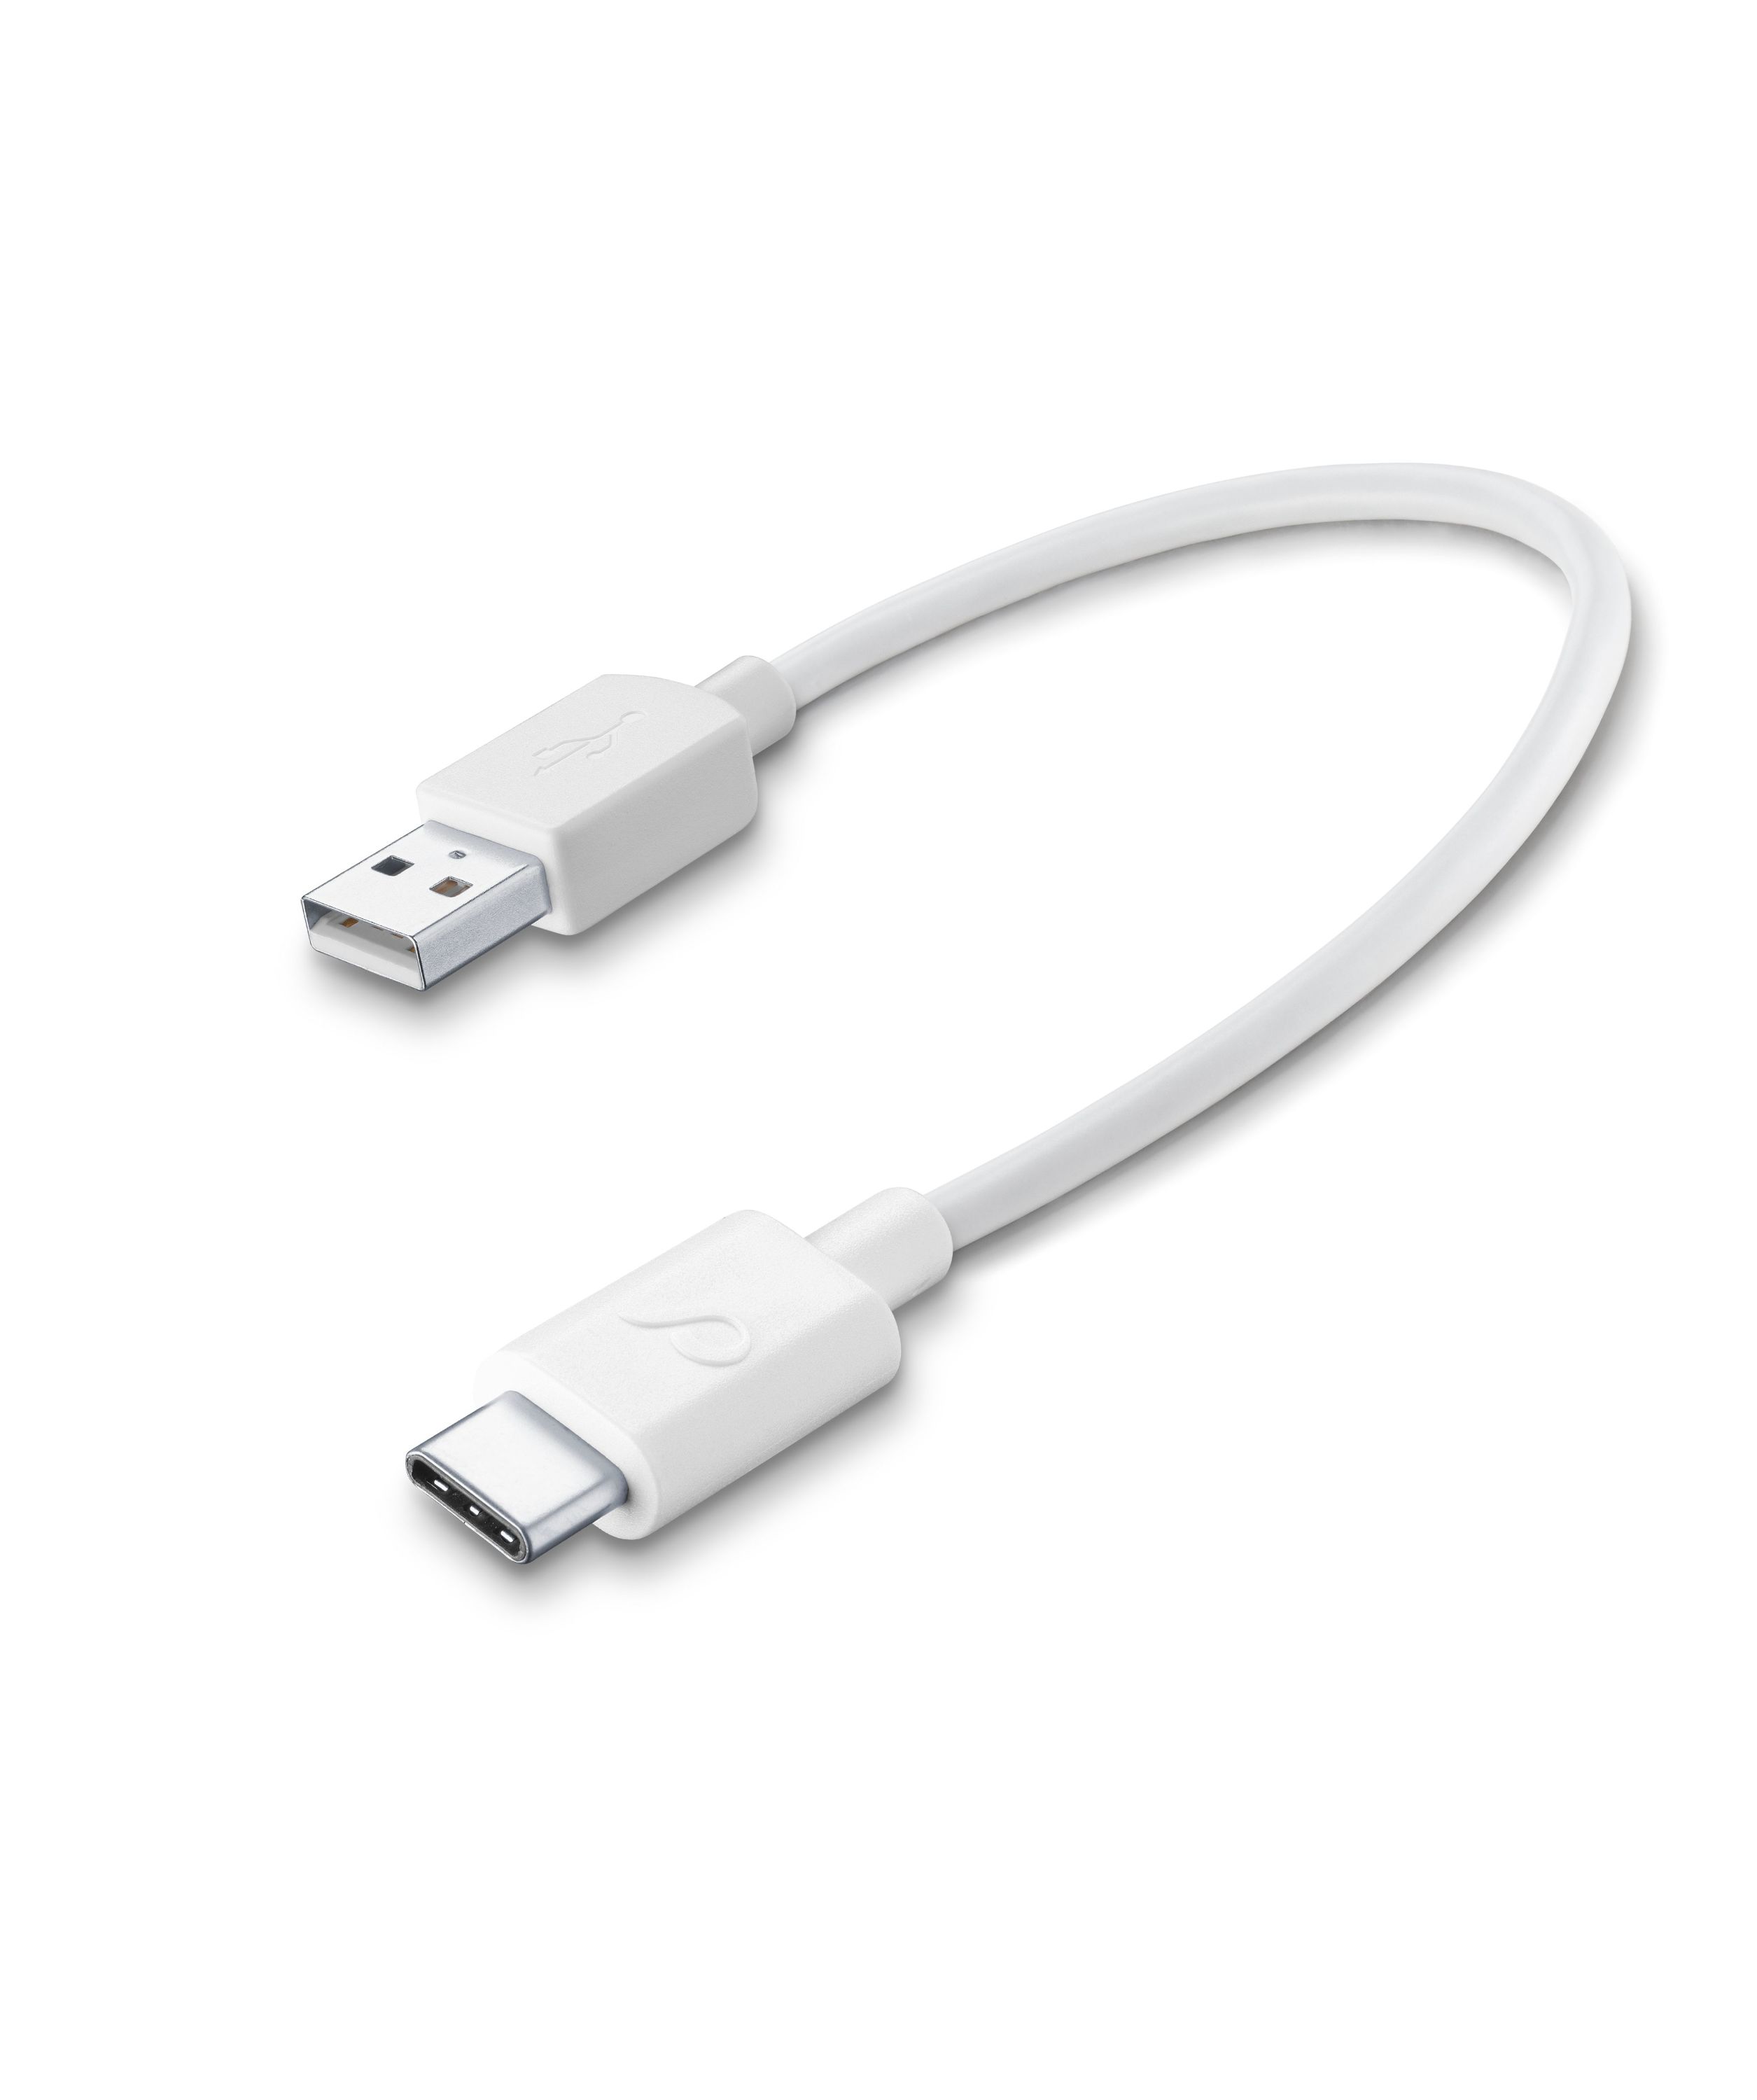 Usb cable, usb-a to usb-c 15cm, white